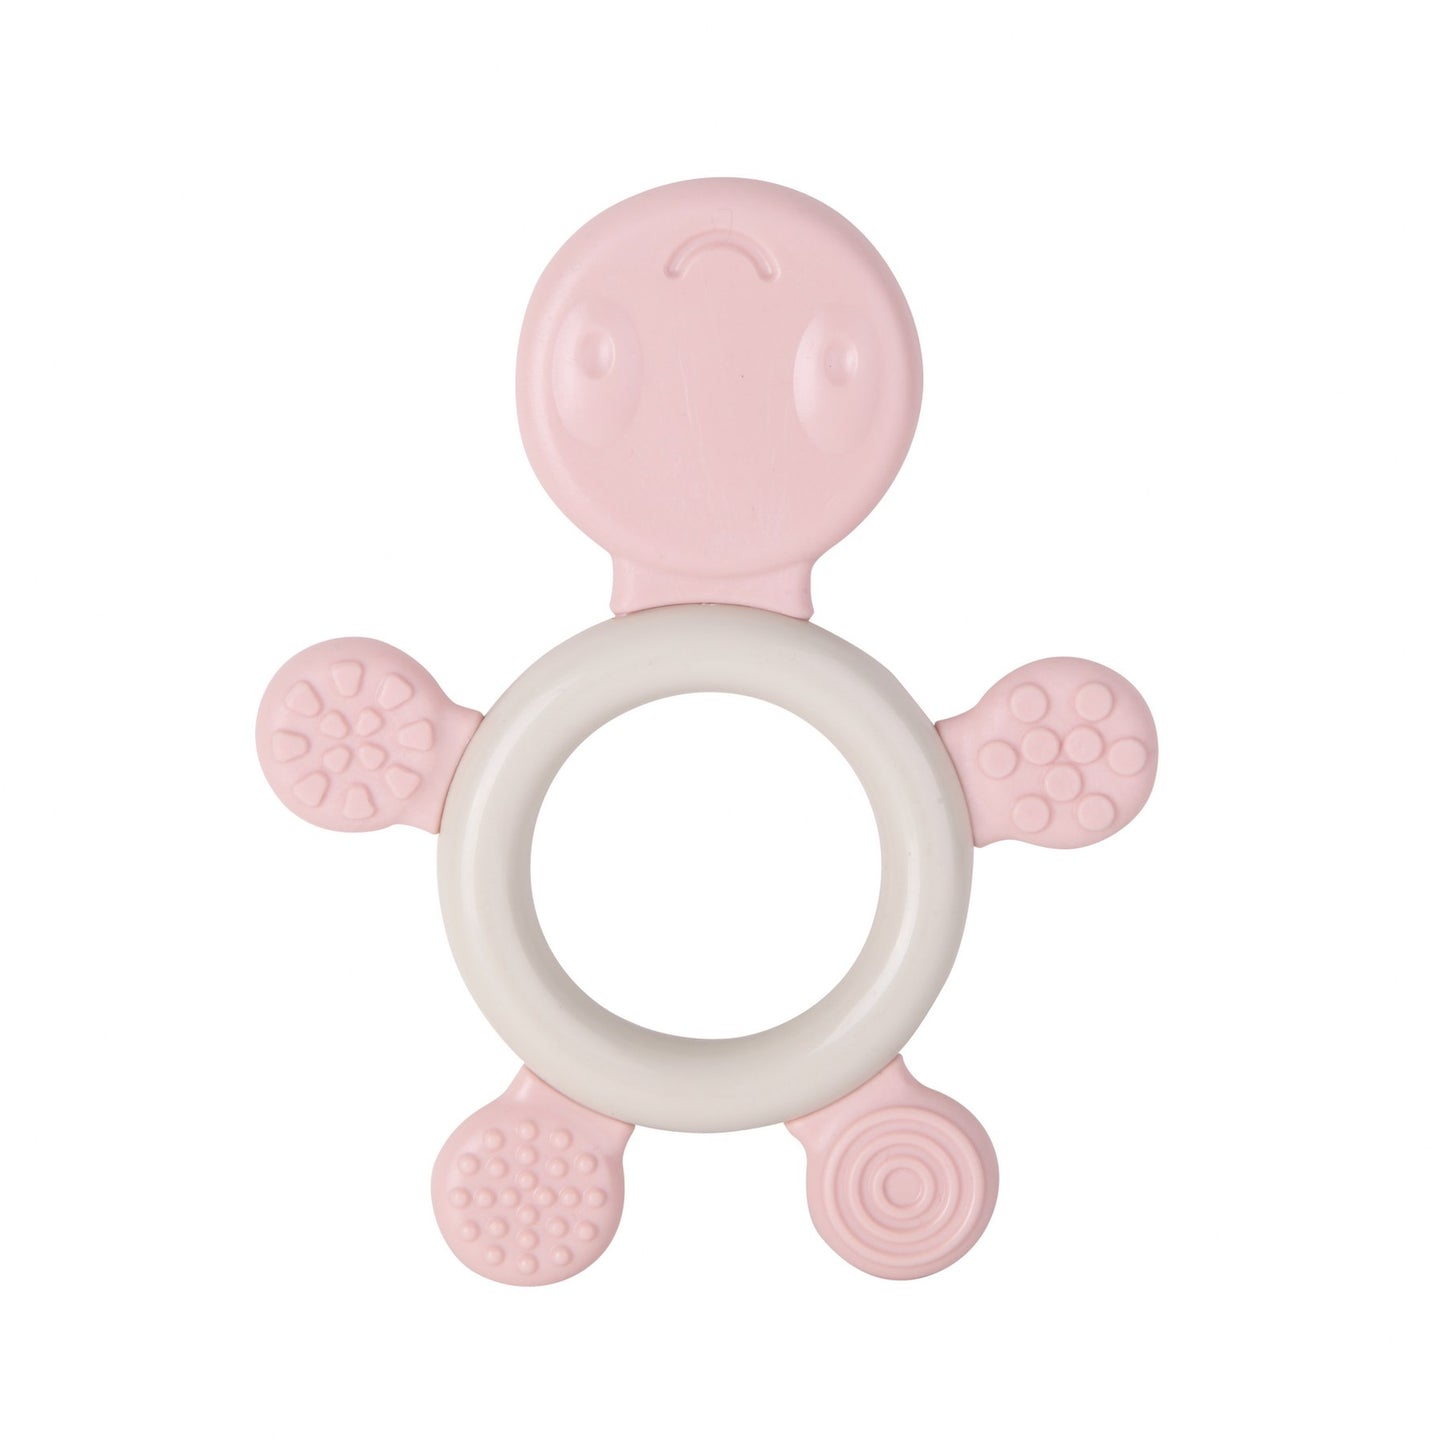 Turtle Teether-BPA, catteether, Teething Bite, Theether, Turtle-Let's Be Child-[Too Twee]-[Tootwee]-[baby]-[newborn]-[clothes]-[essentials]-[toys]-[Lebanon]